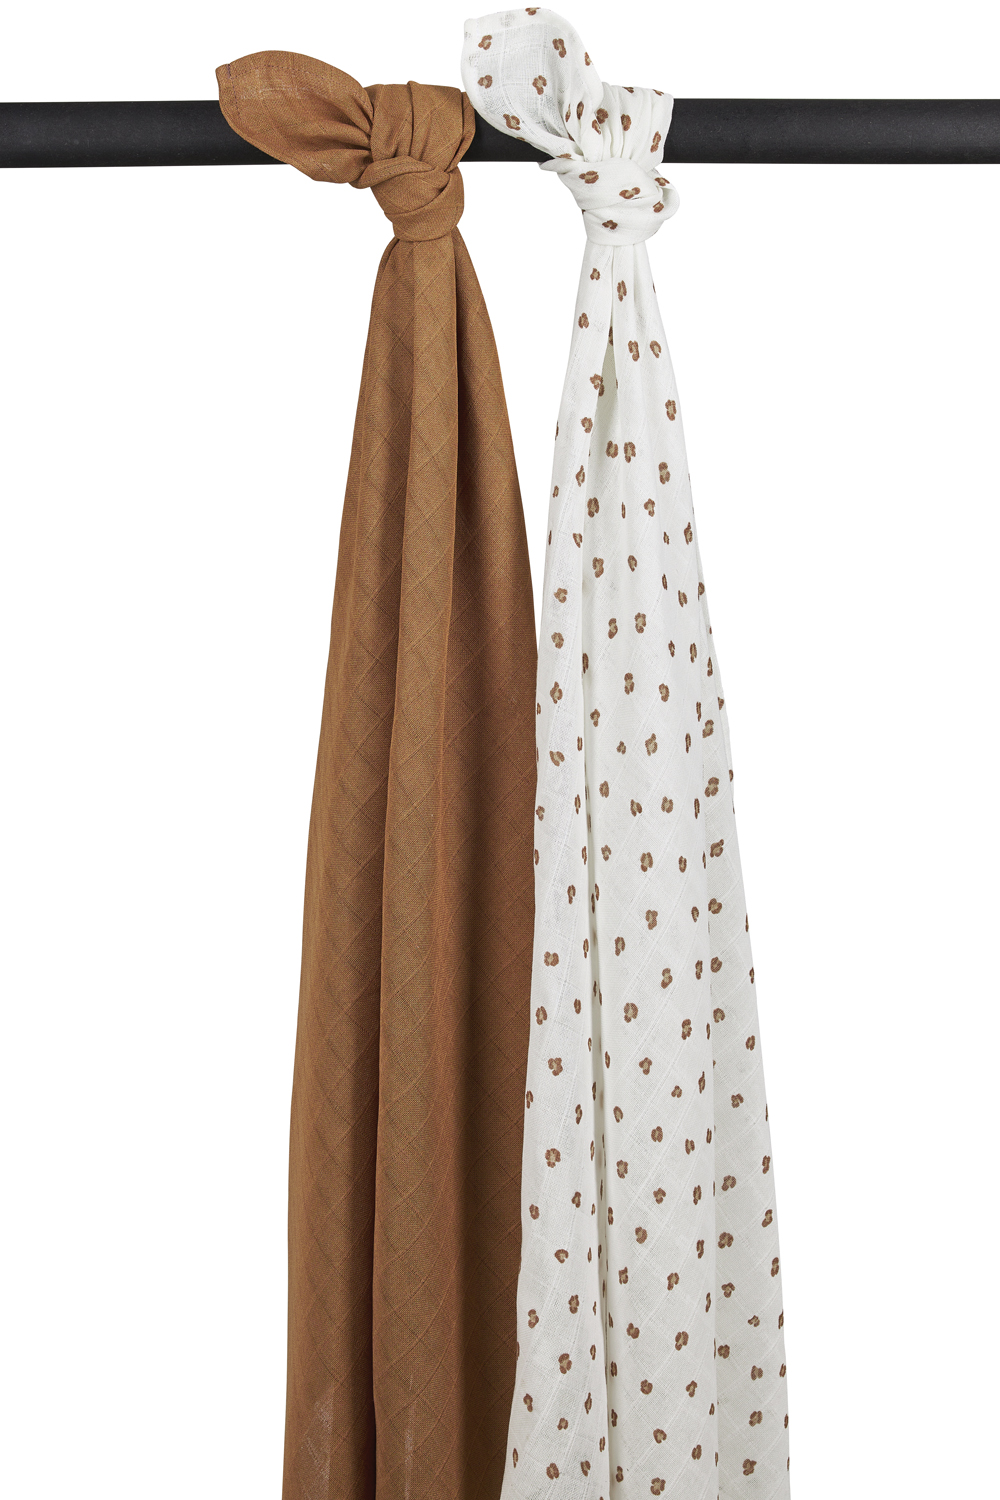 Muslin swaddles 2-pack Mini Panther - Toffee - 120x120cm